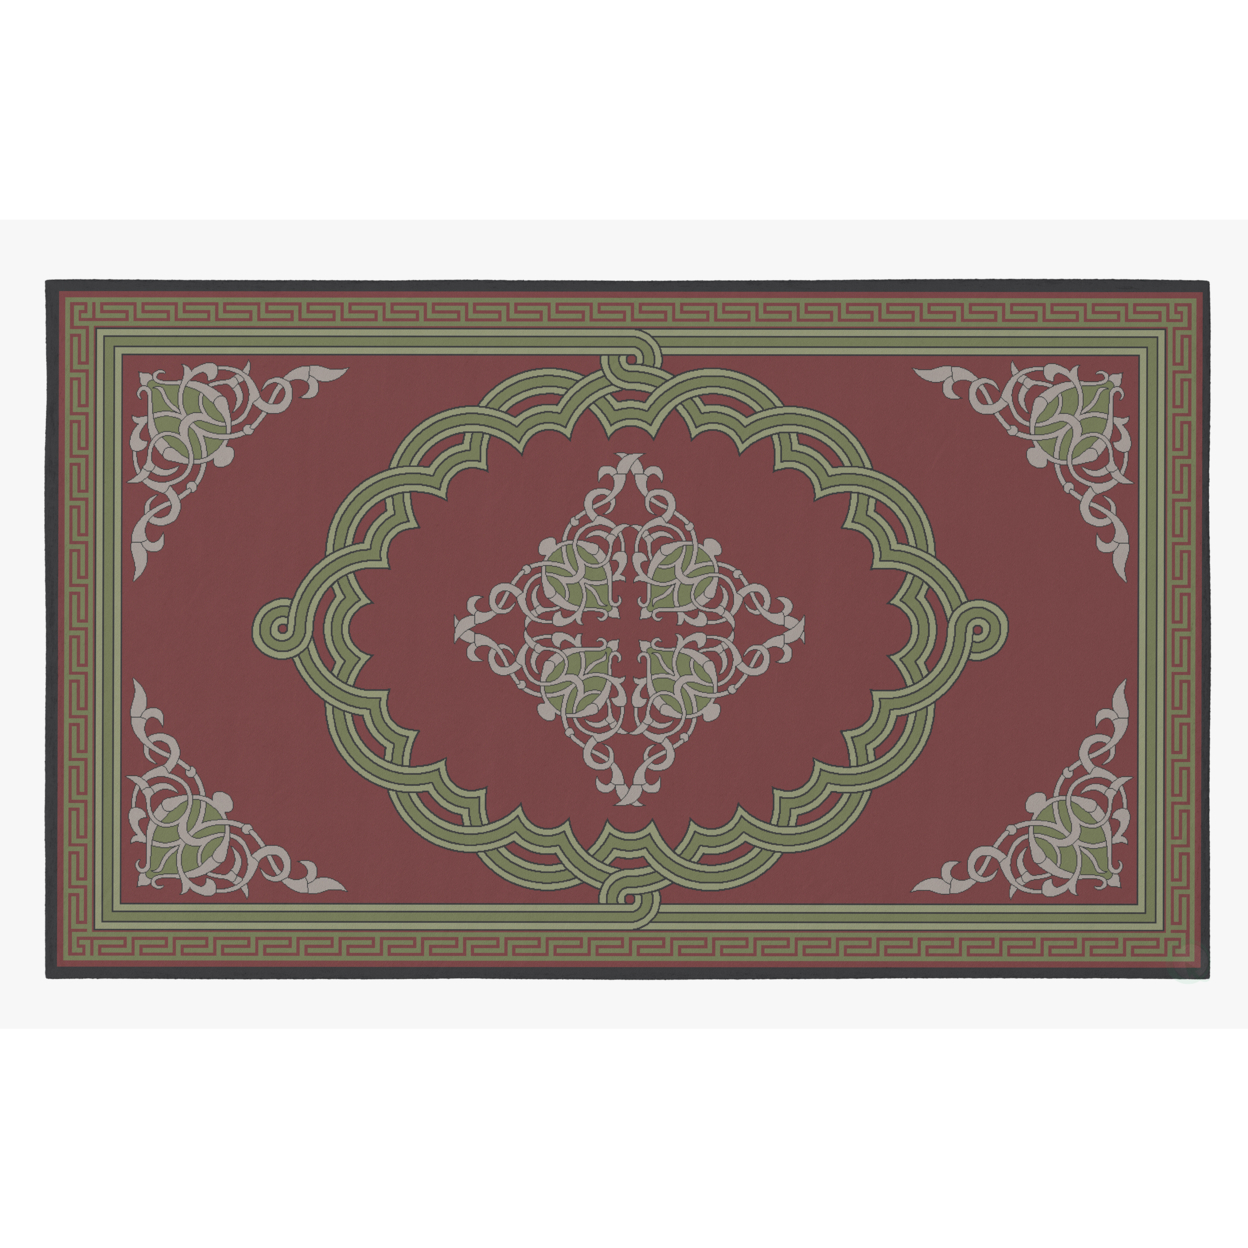 Deerlux Transitional Living Room Area Rug With Nonslip Backing, Red Medallion Pattern - 8 X 10